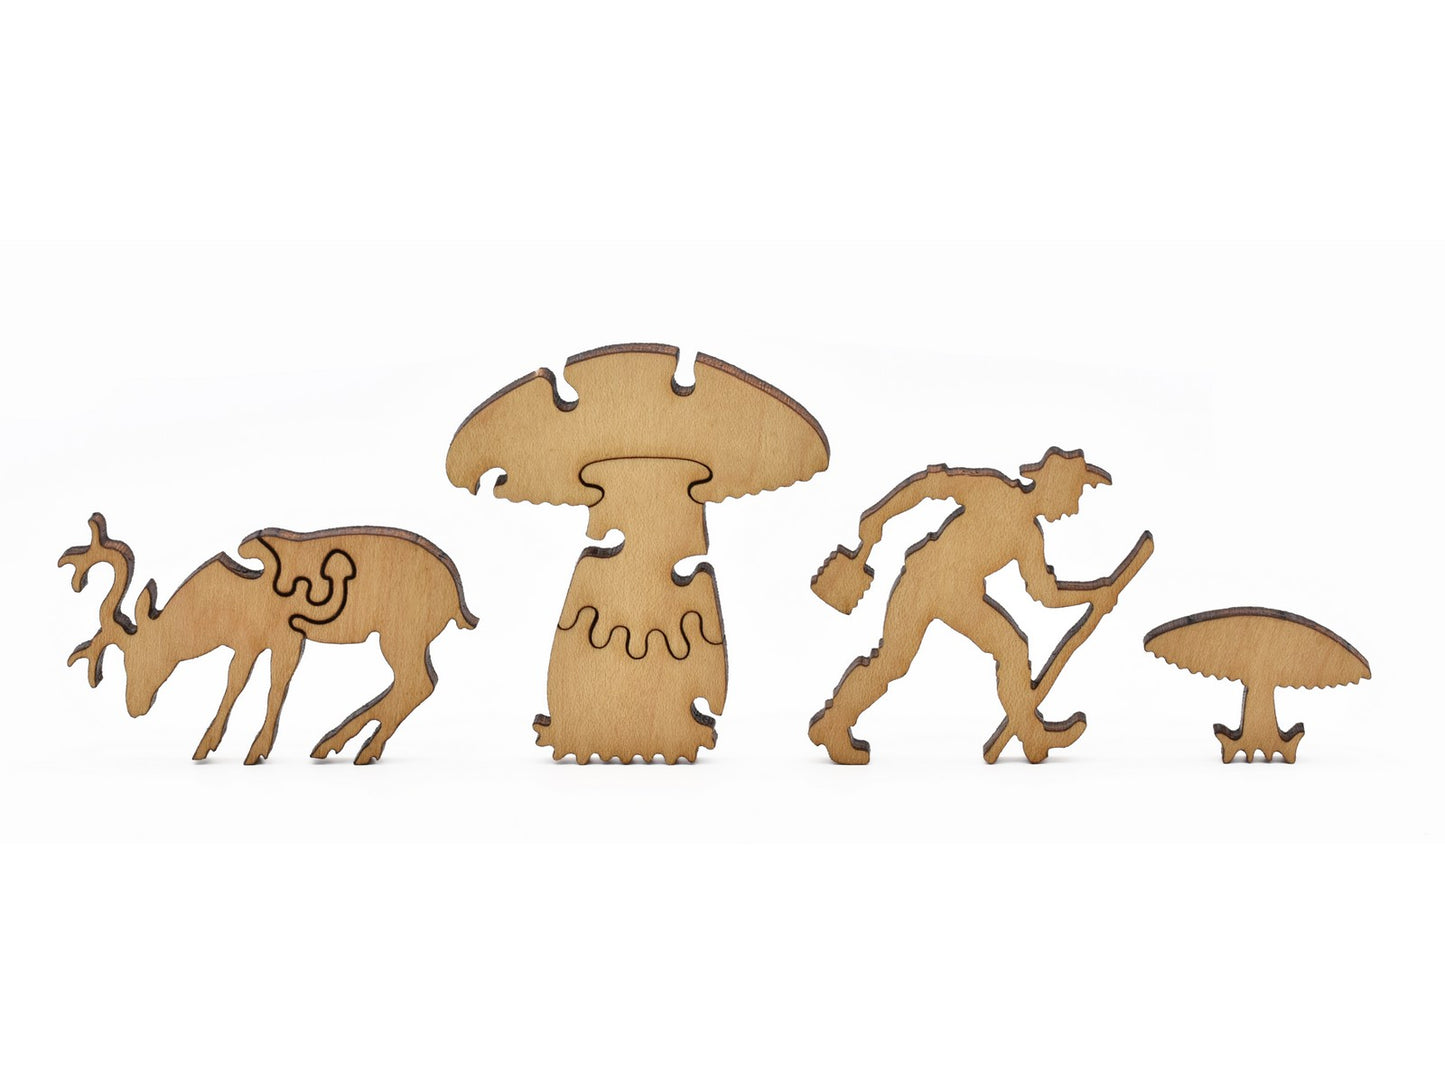 A closeup of pieces in the shape of a deer, a hiker, and mushrooms.